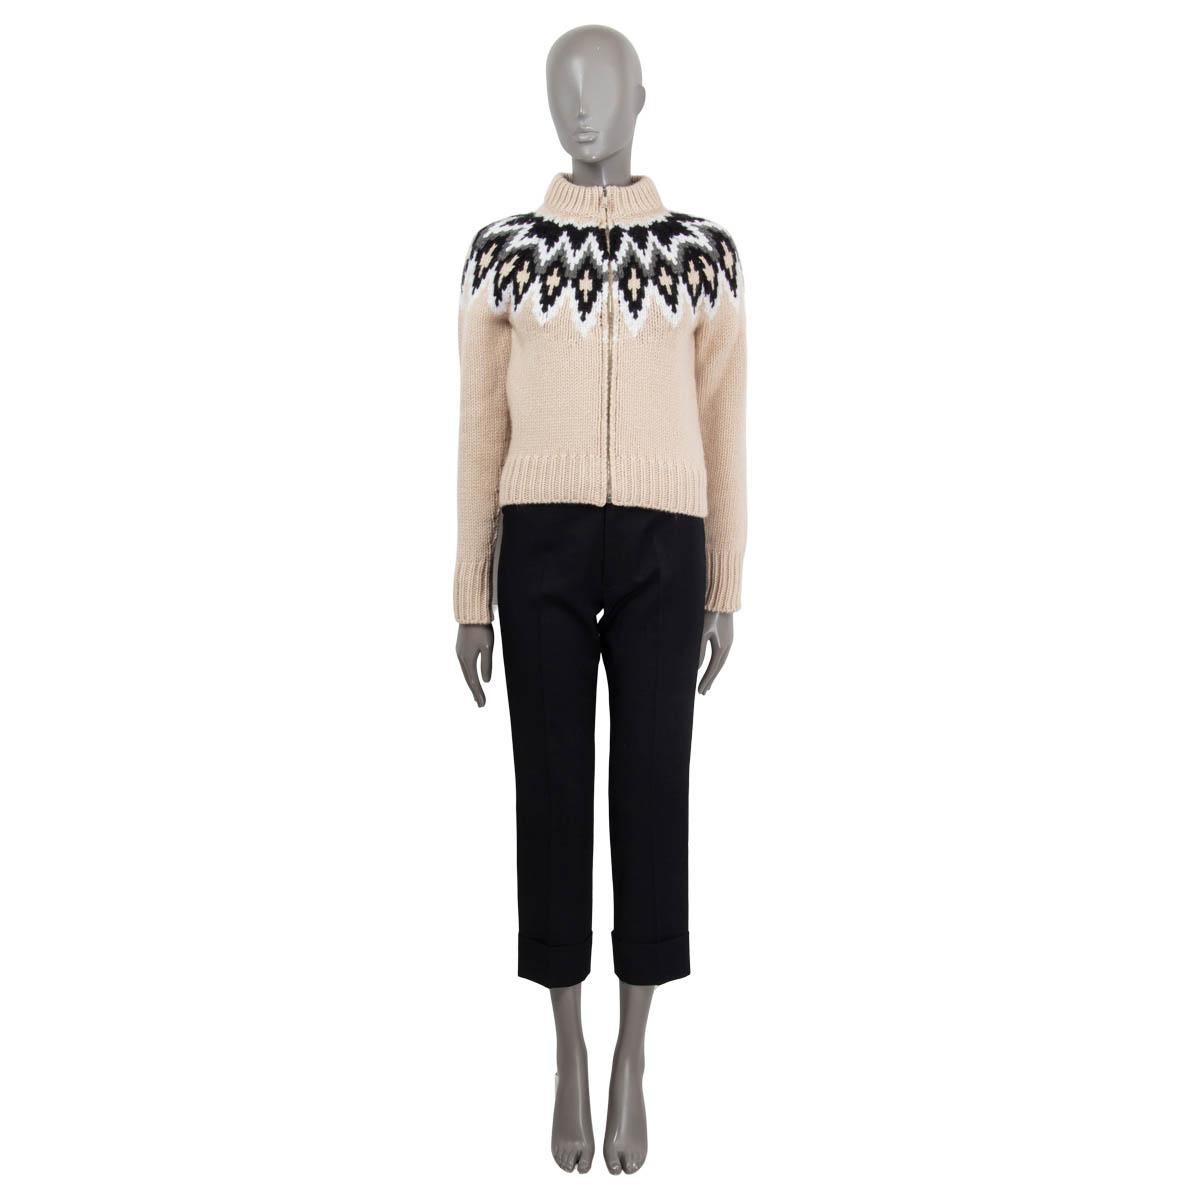 100% authentic Prada Fire Isle cardigan in beige cashmere (85%) and wool. (15) with details in black, grey and white. Features a mock neck and a silver-tone zipper. Has been worn and is in virtually new condition.

Measurements
Tag